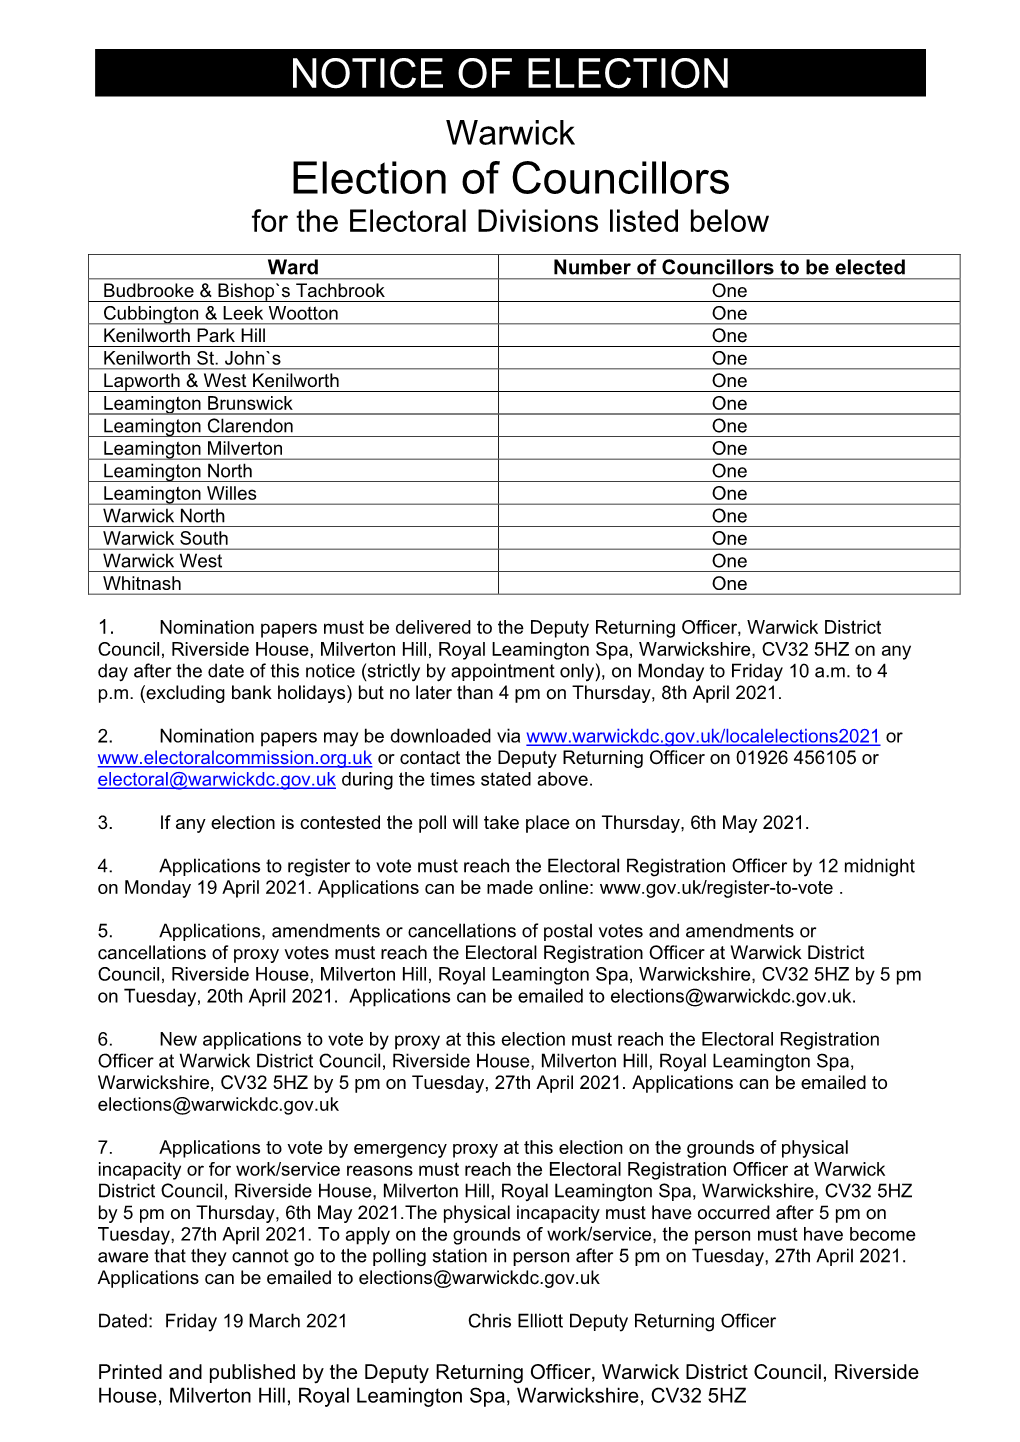 Election of Councillors for the Electoral Divisions Listed Below